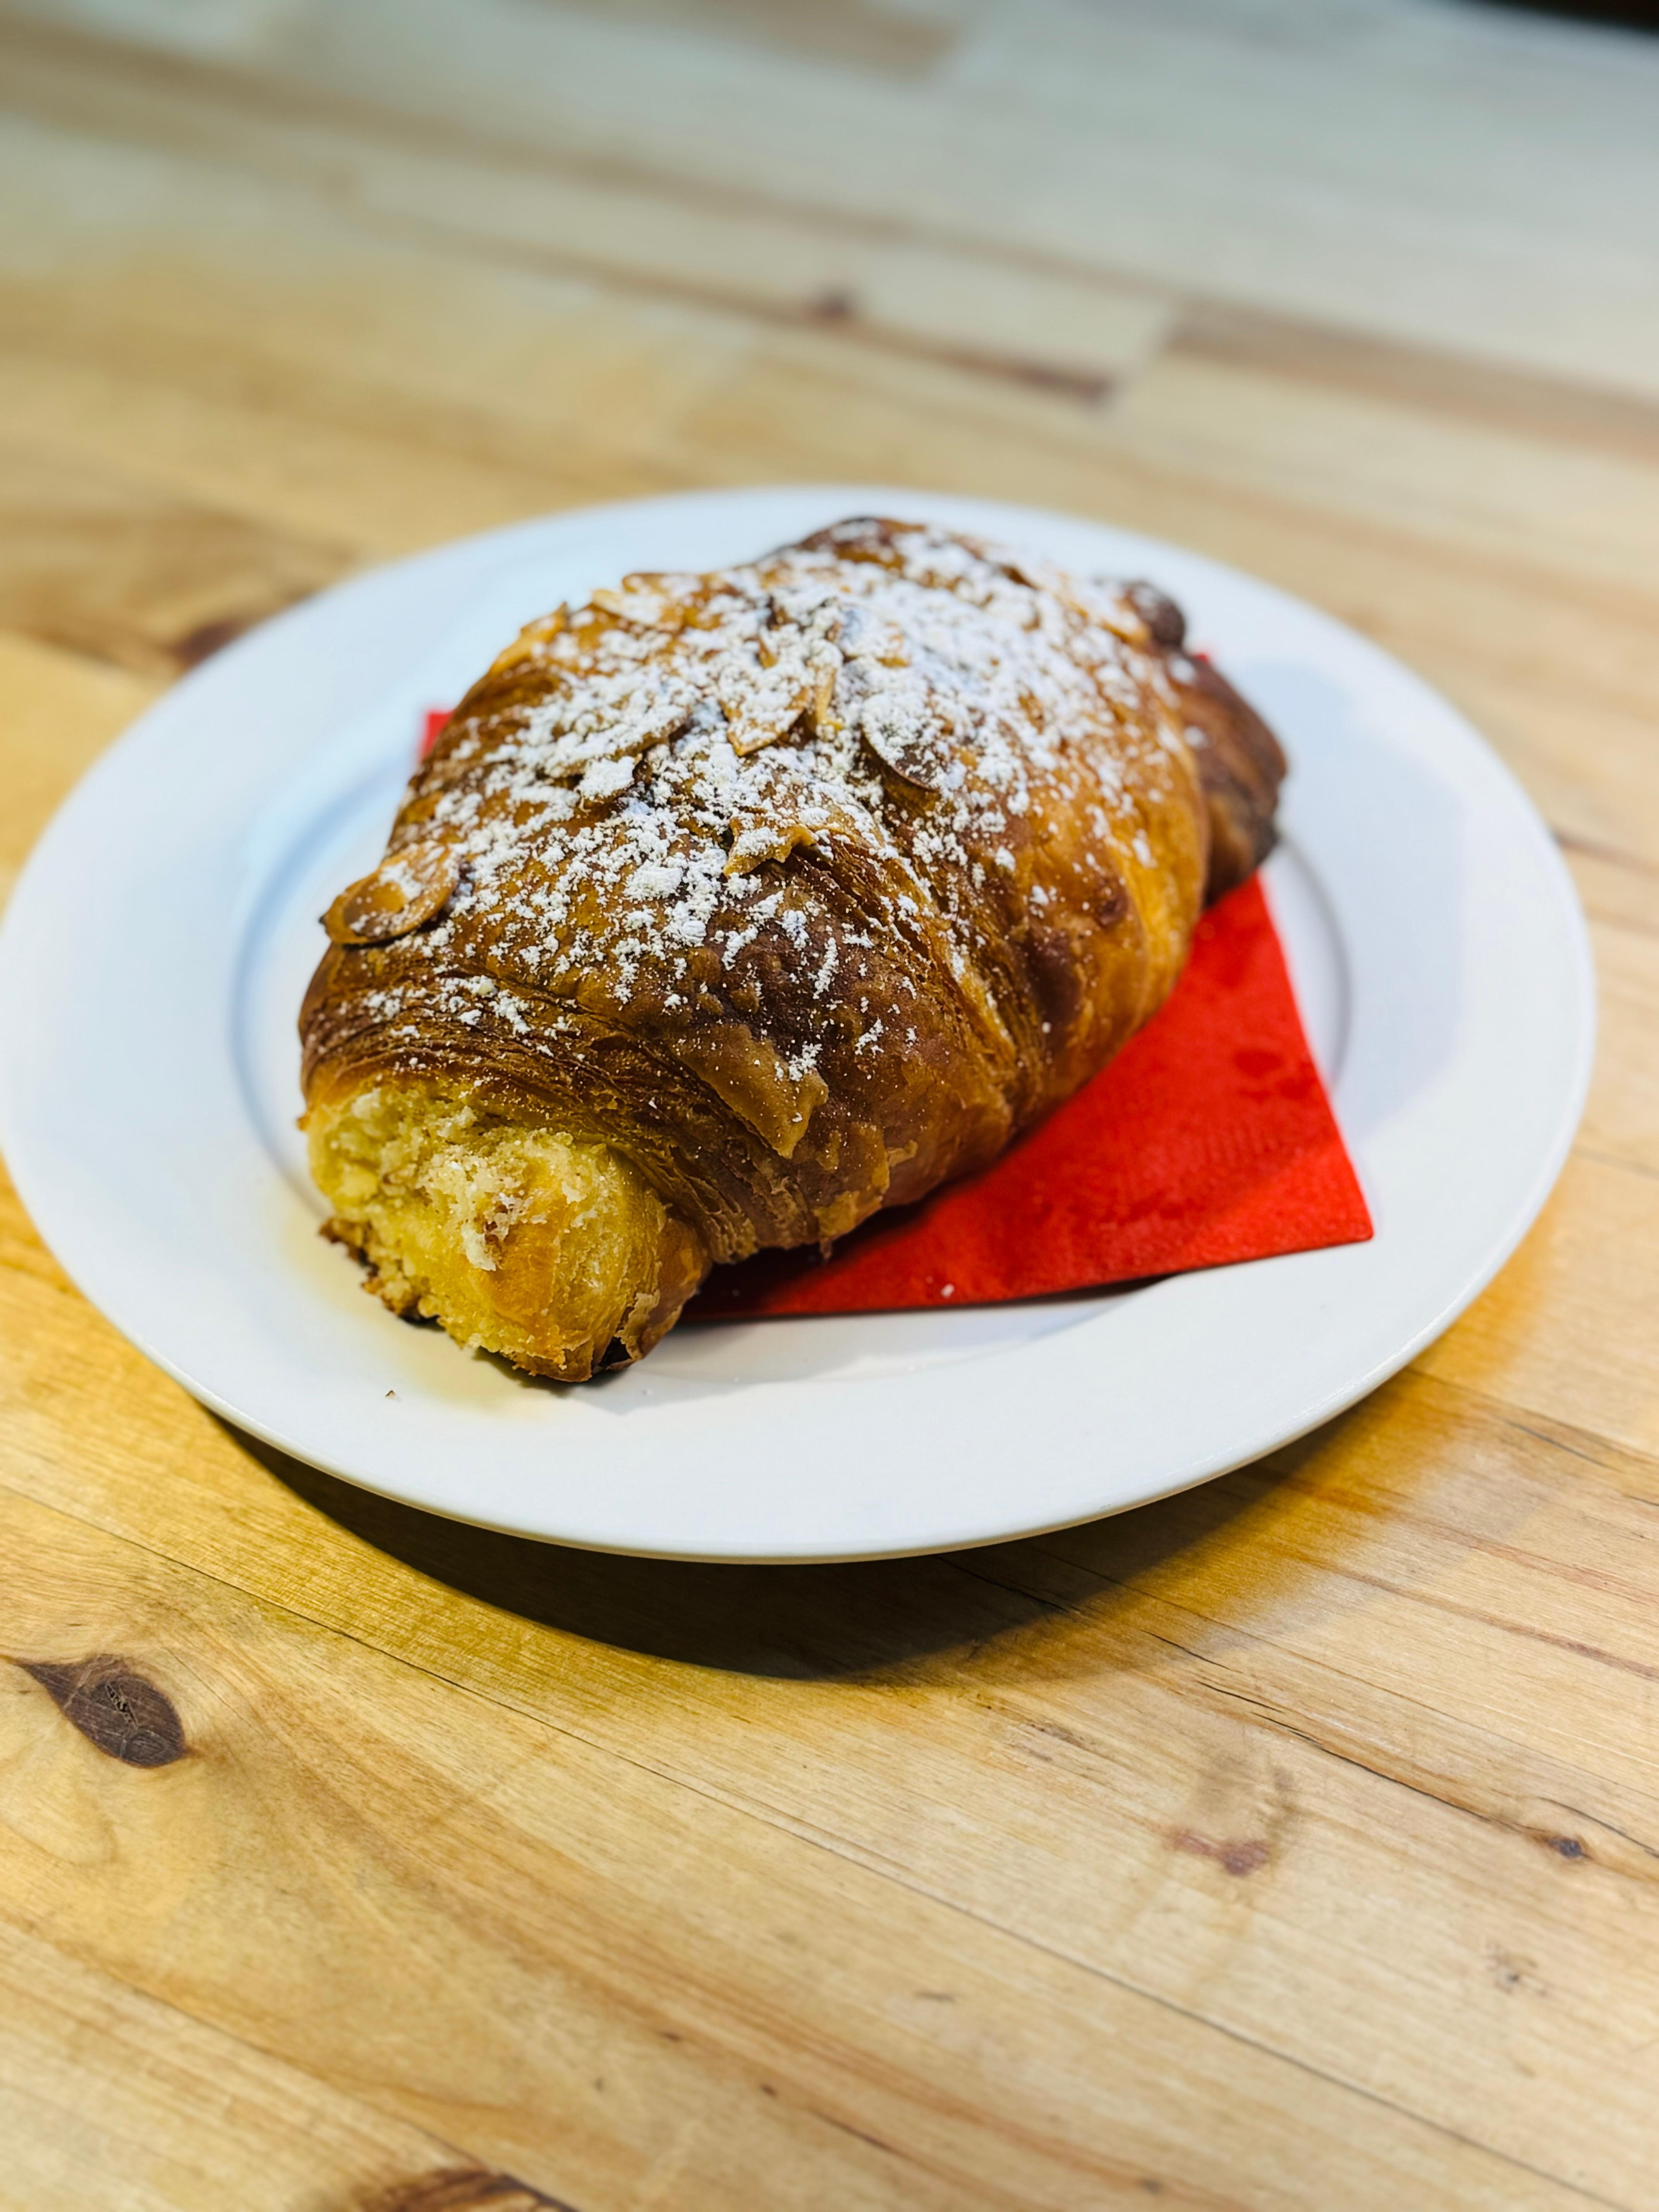 House-baked Almond Croissant